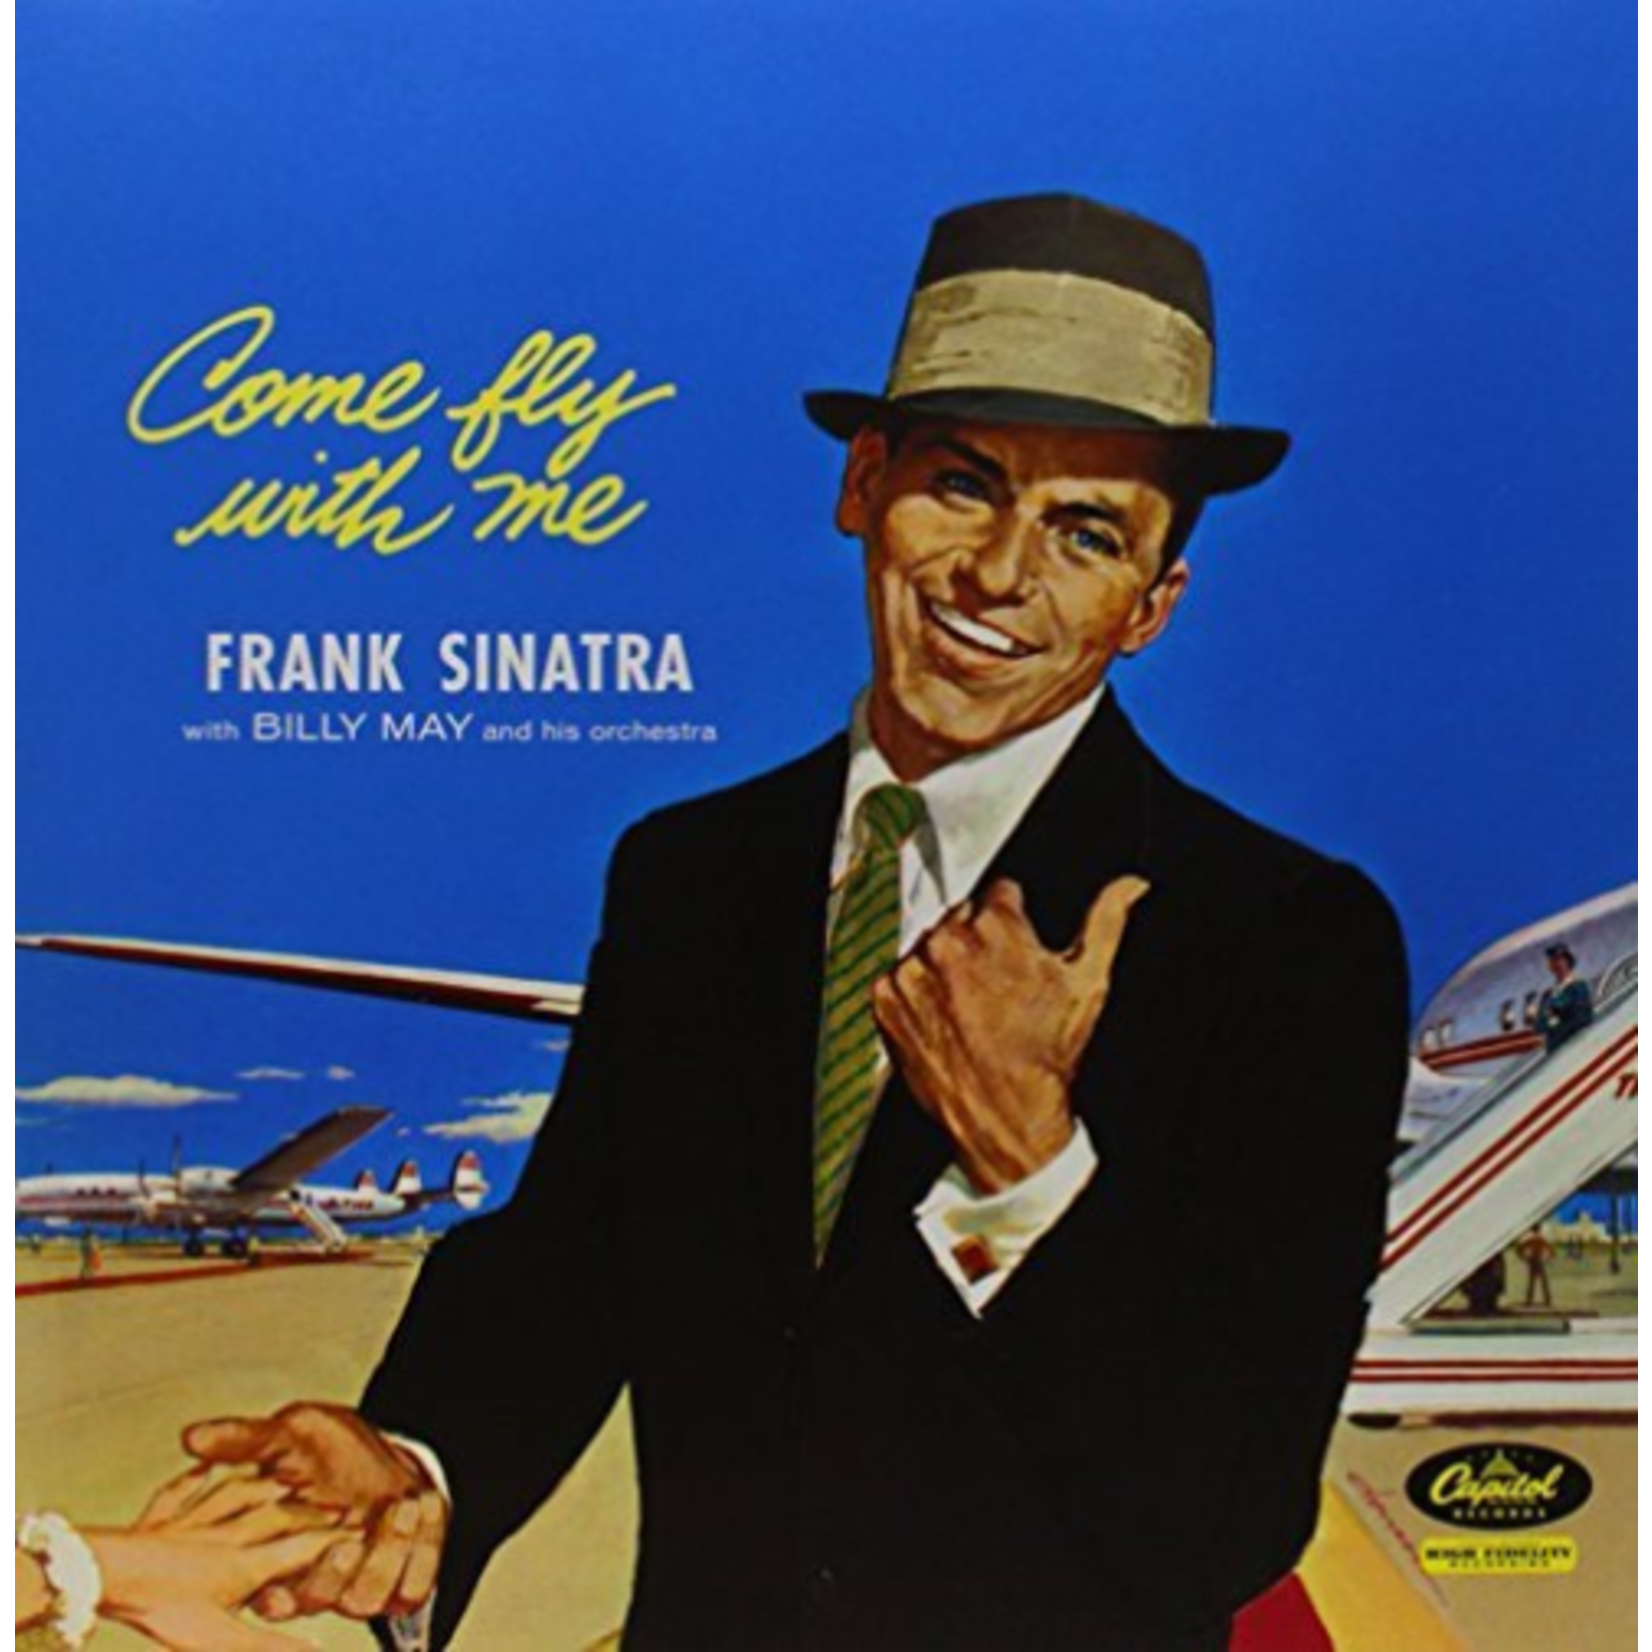 FRANK SINATRA COME FLY WITH ME LP